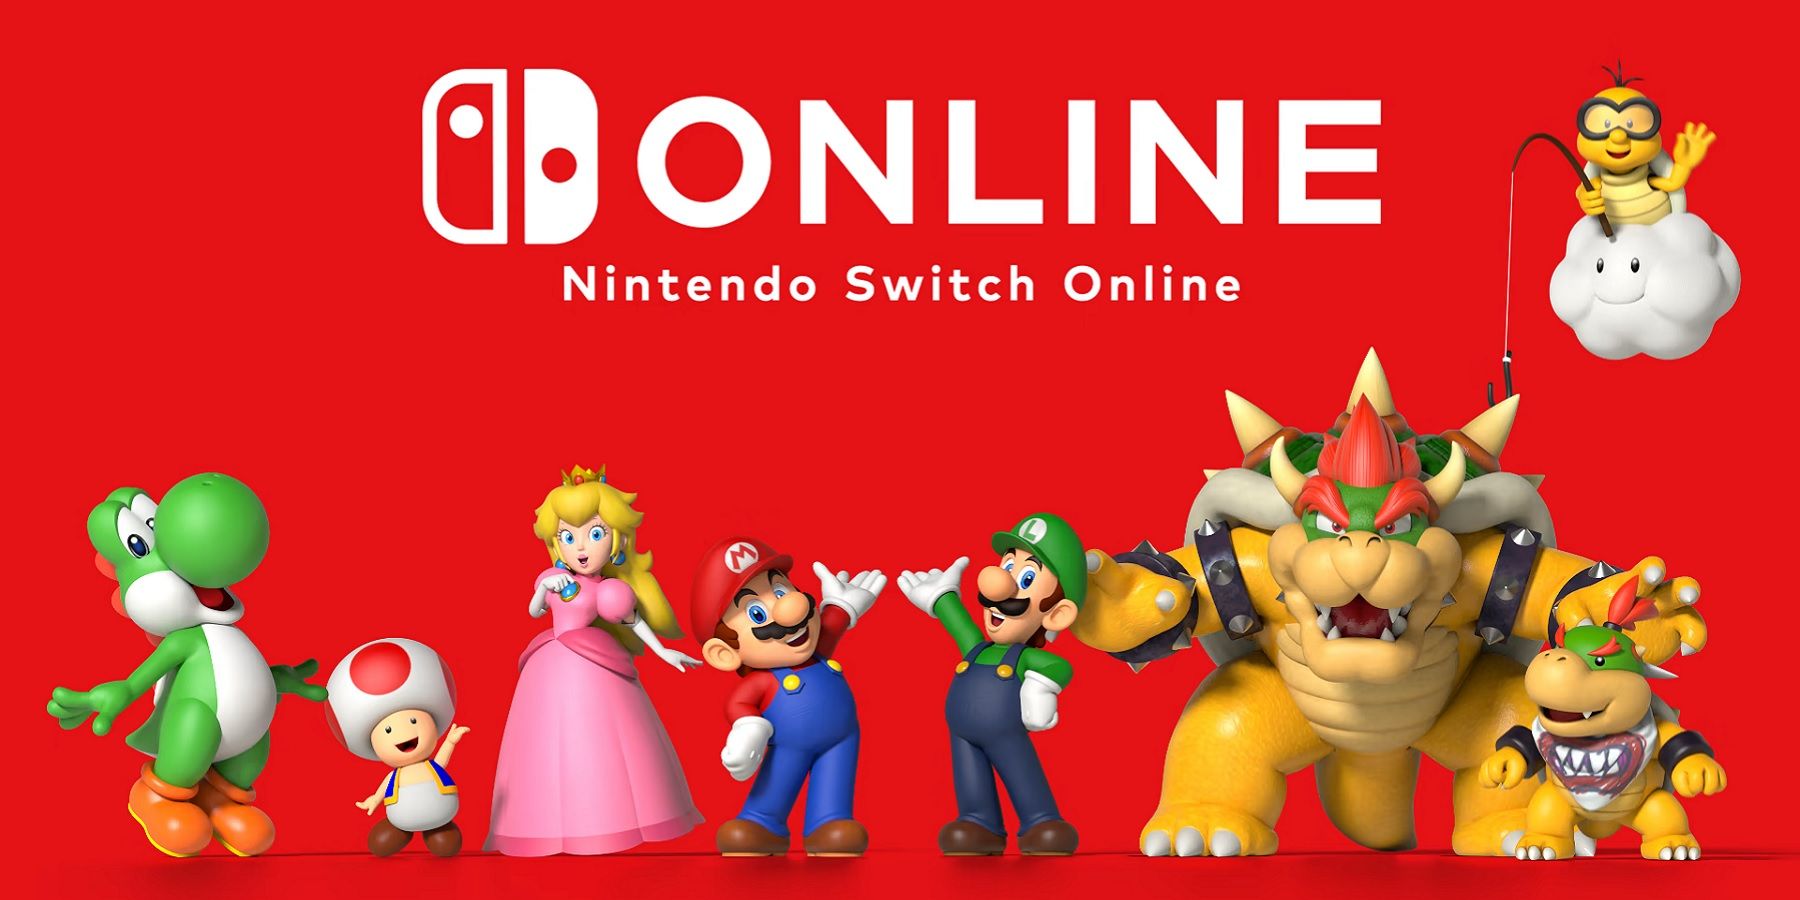 nintendo switch online logo and characters